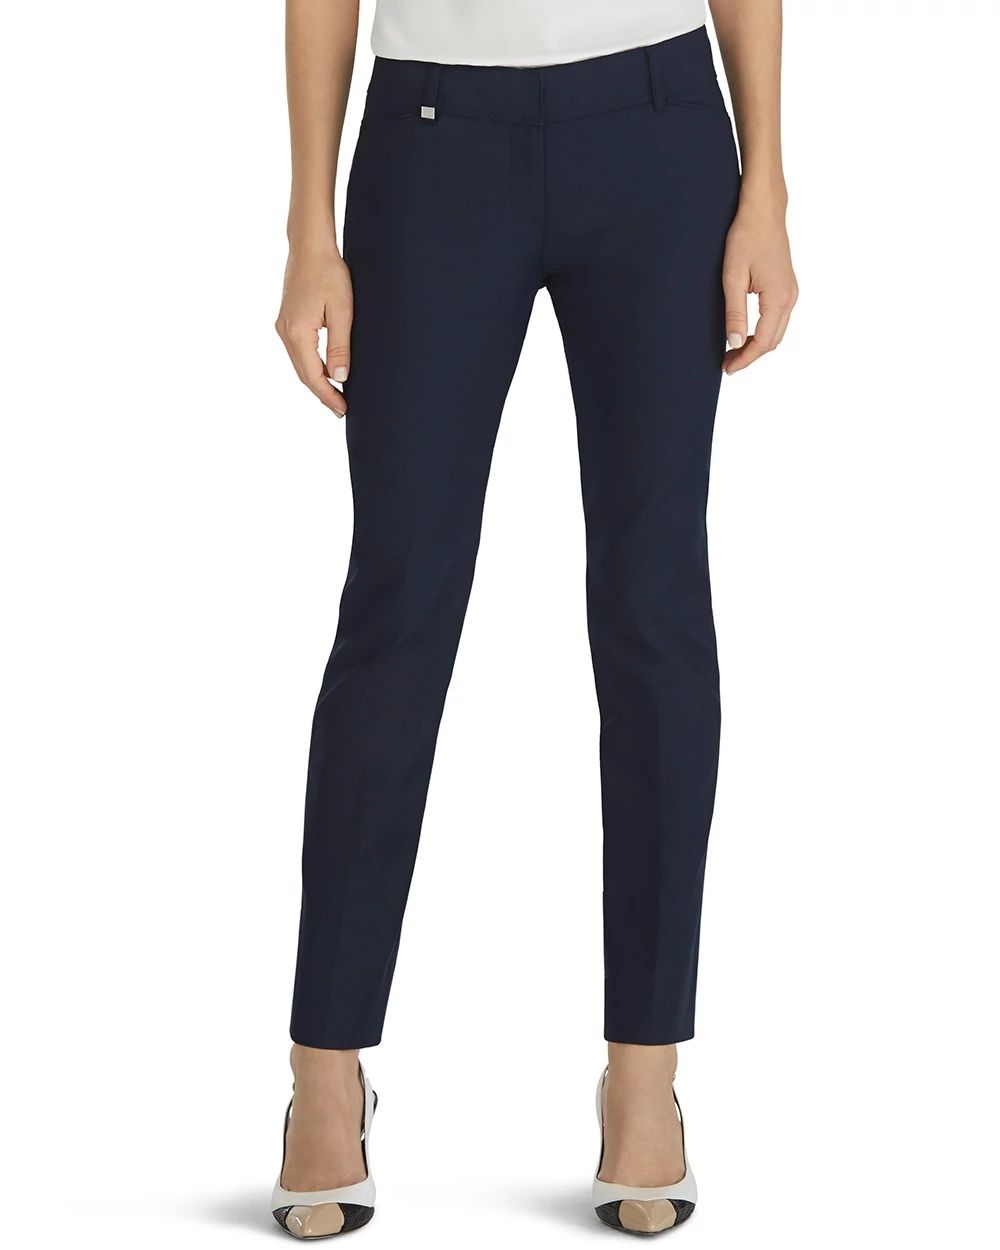 Curvy Perfect Form Navy Ankle Pants